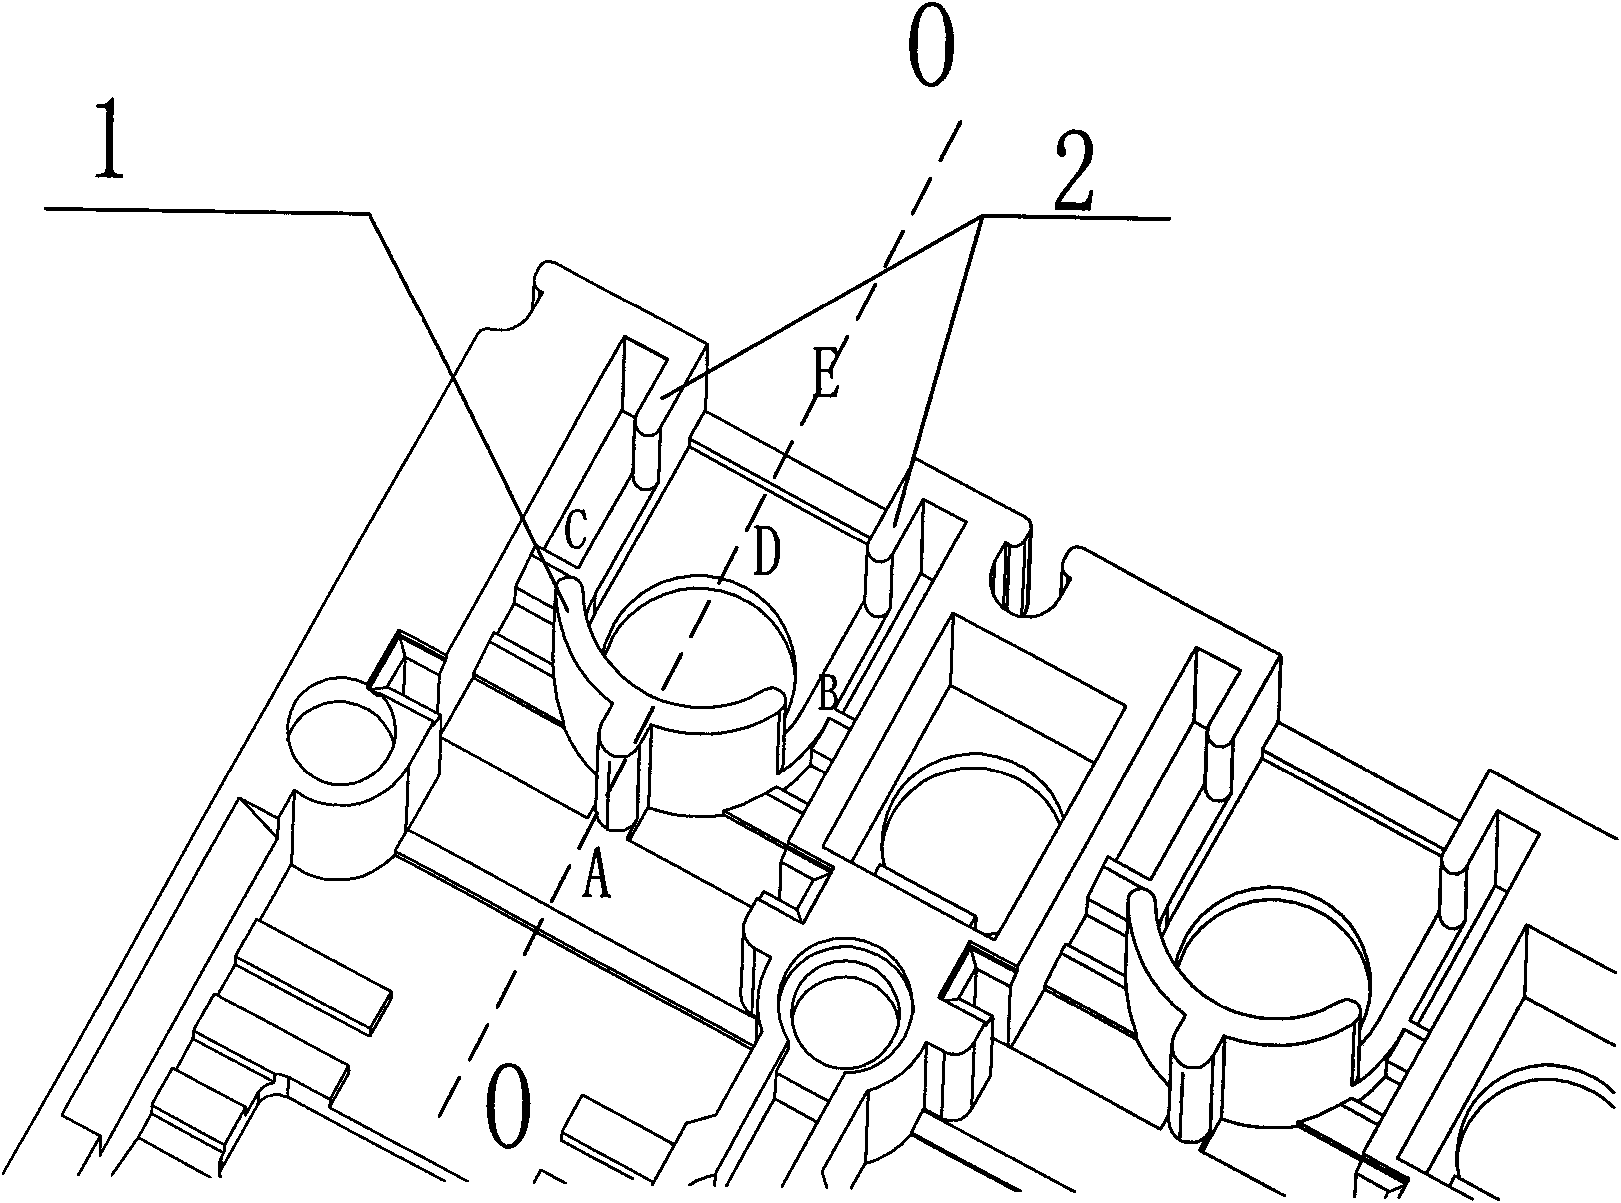 Structure for reducing flashover length of moulded case circuit breaker